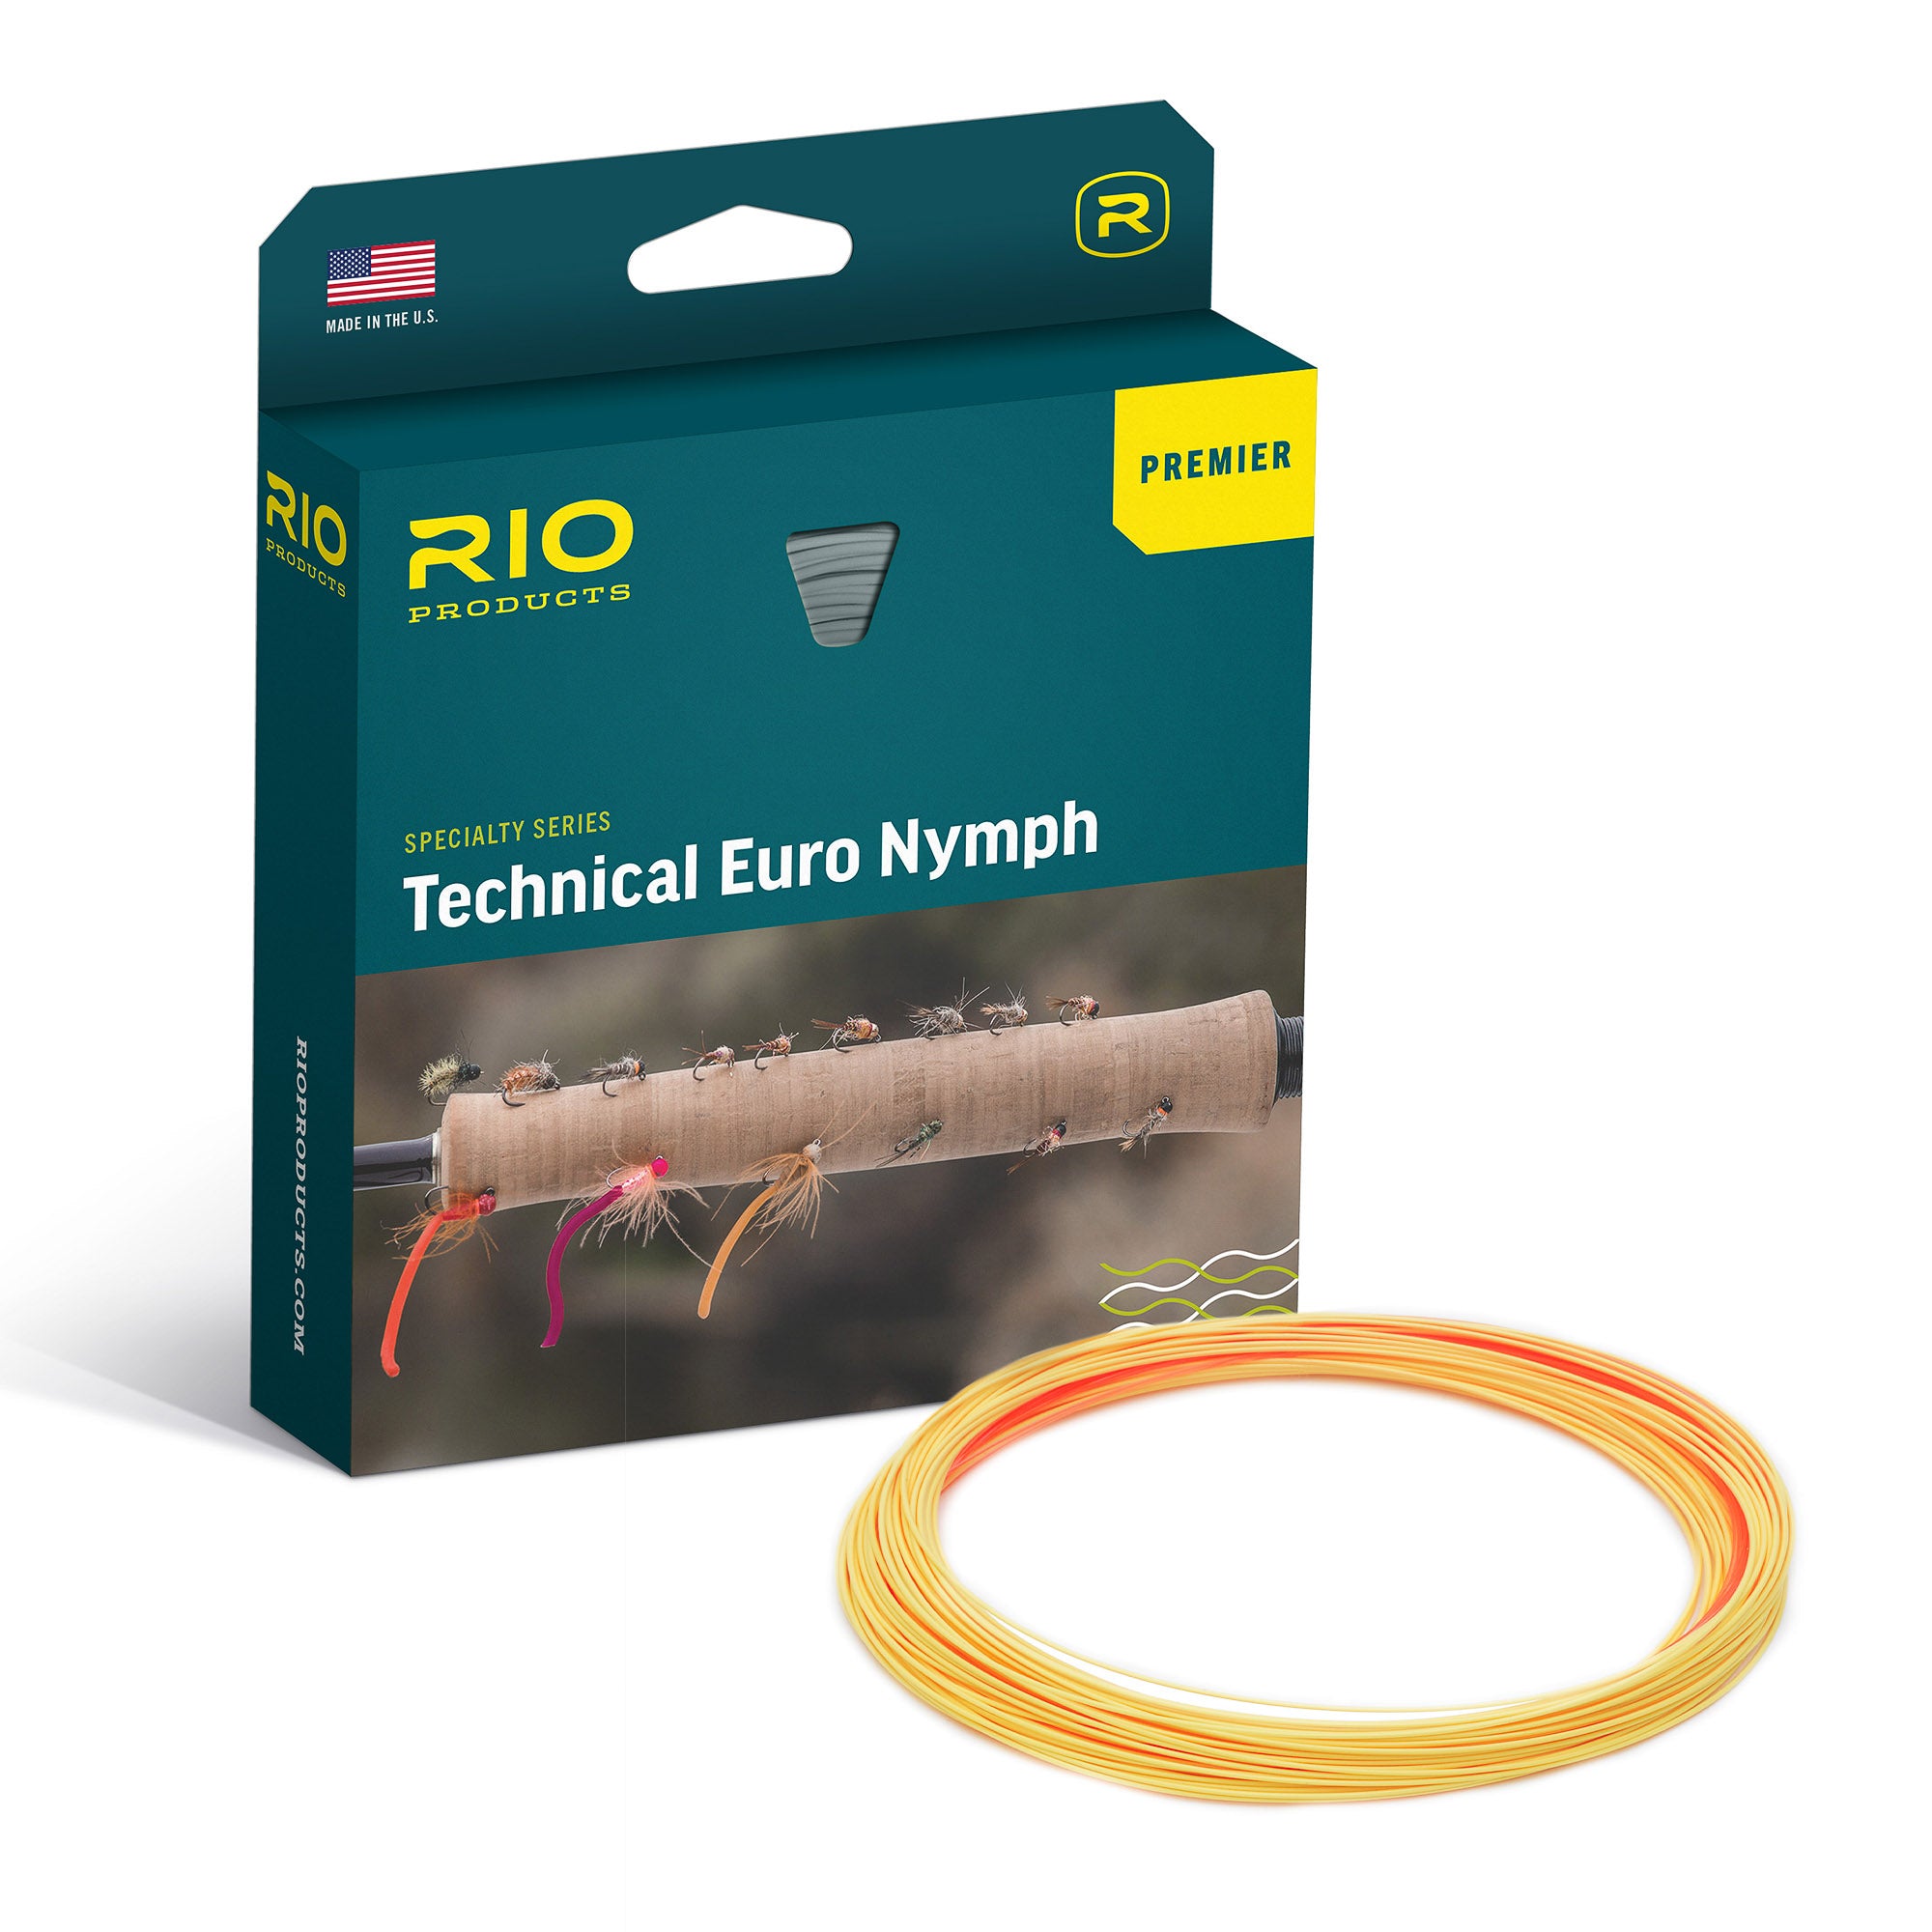 Rio Technical Euro Nymph Premier Fly Line